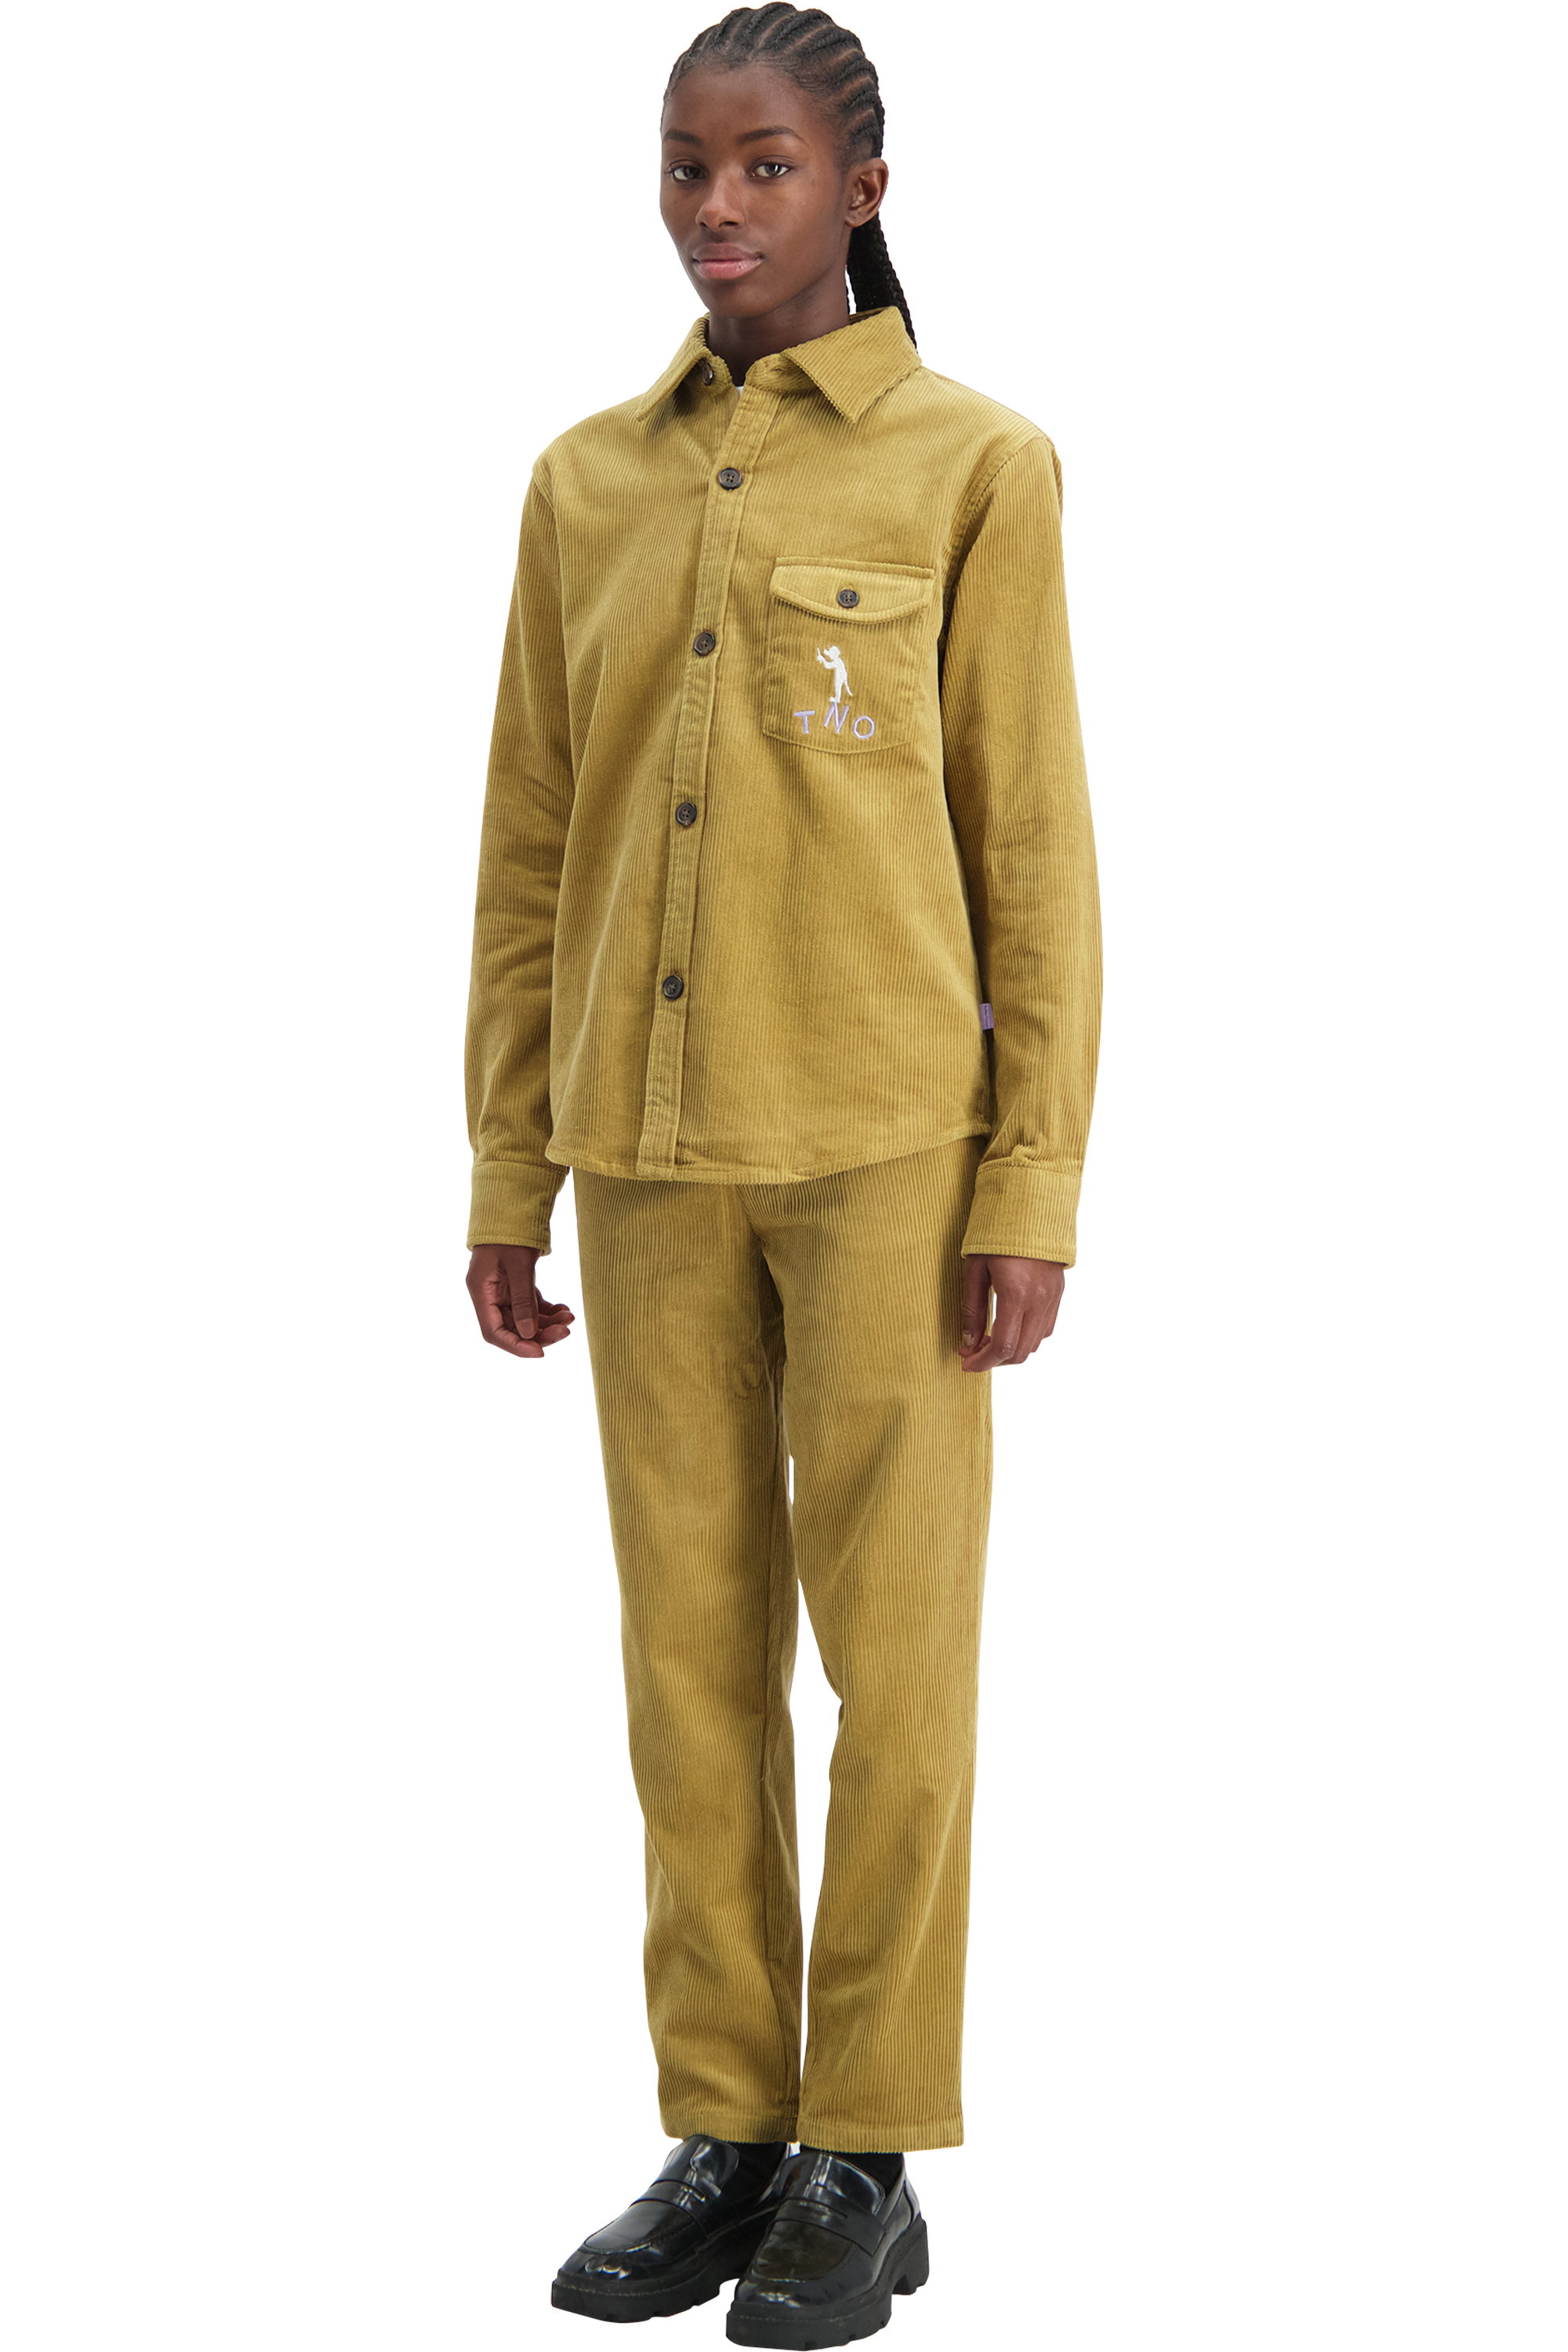 products-corduroy_mosterd_fullbody_tiff_7-png